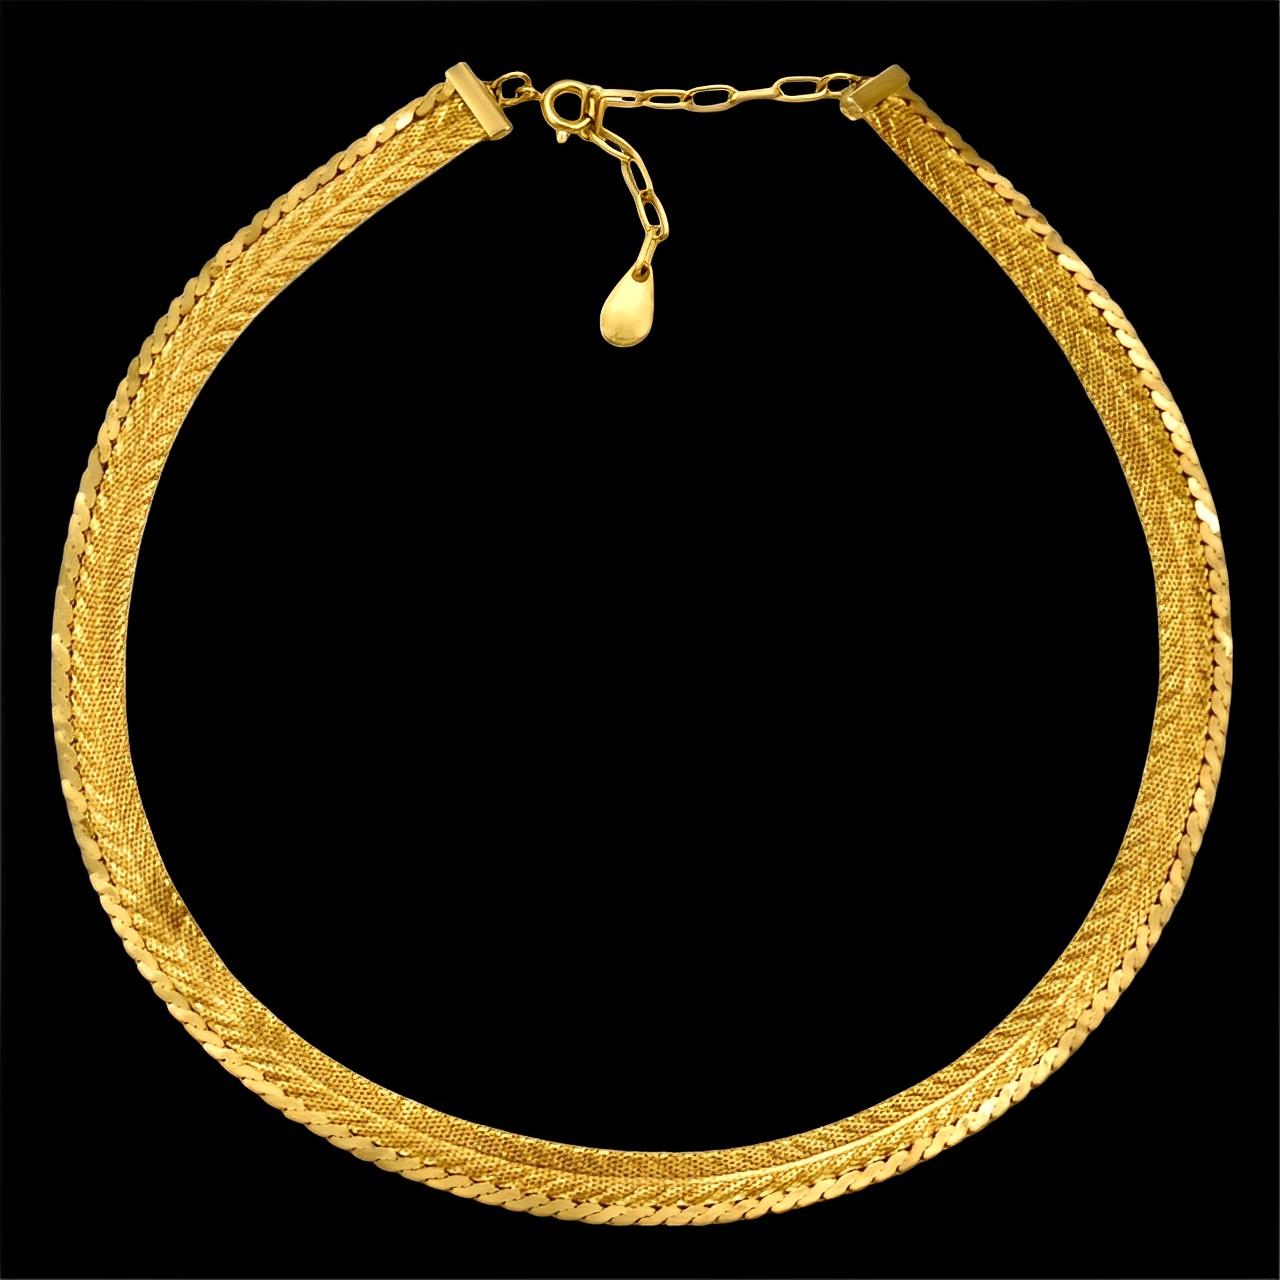 Gold Plated Chevron Mesh and Shiny Serpentine Collar Necklace circa 1980s For Sale 4